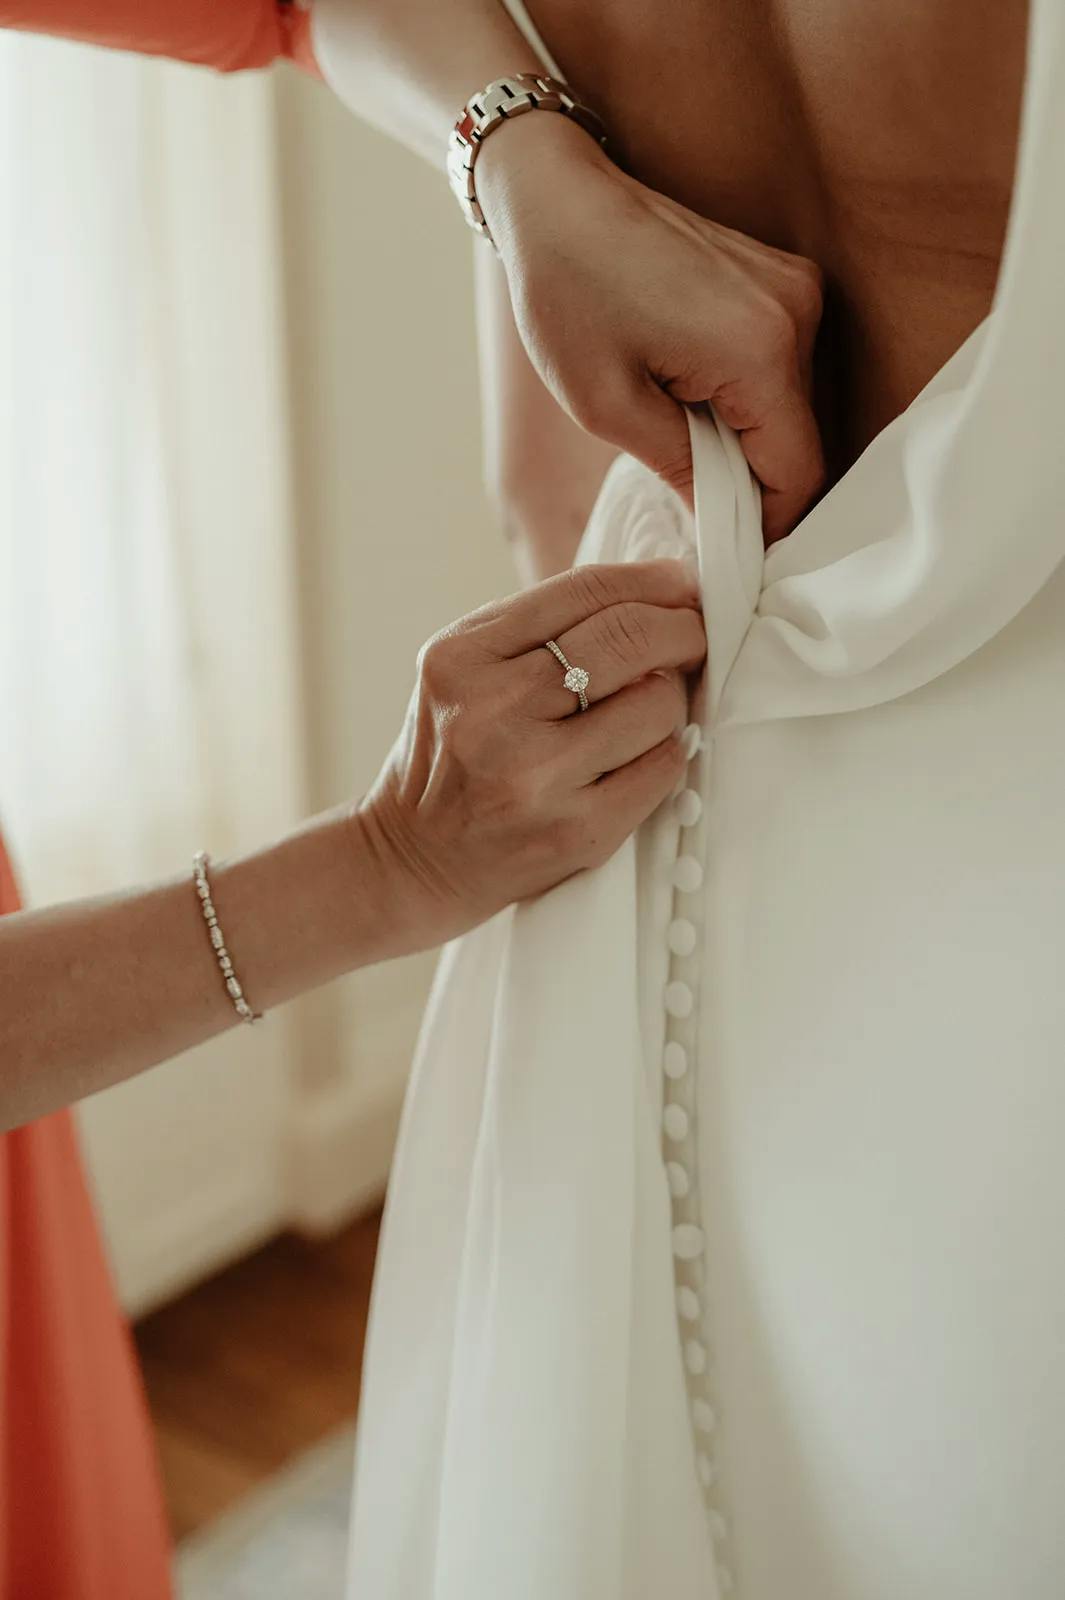 A person is helping another person by fastening buttons on the back of their white dress. The assisting person has a bracelet and a ring on their left hand. Only the hands and part of the torso of the person being helped are visible.